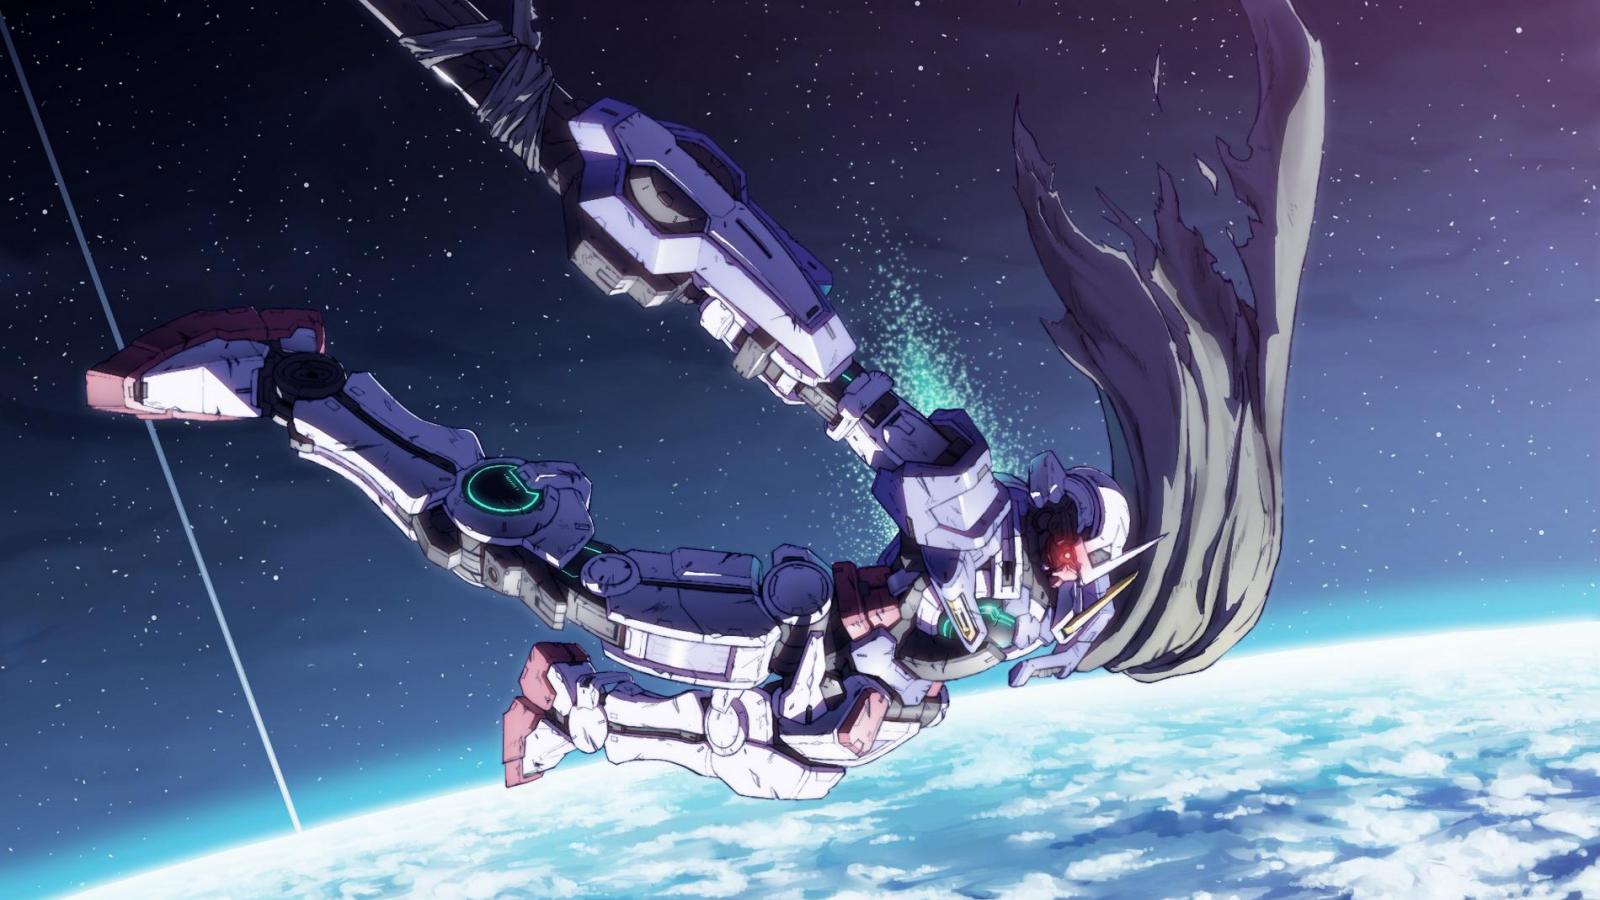 00 gundam exia - (#97458) - High Quality and Resolution Wallpapers ...